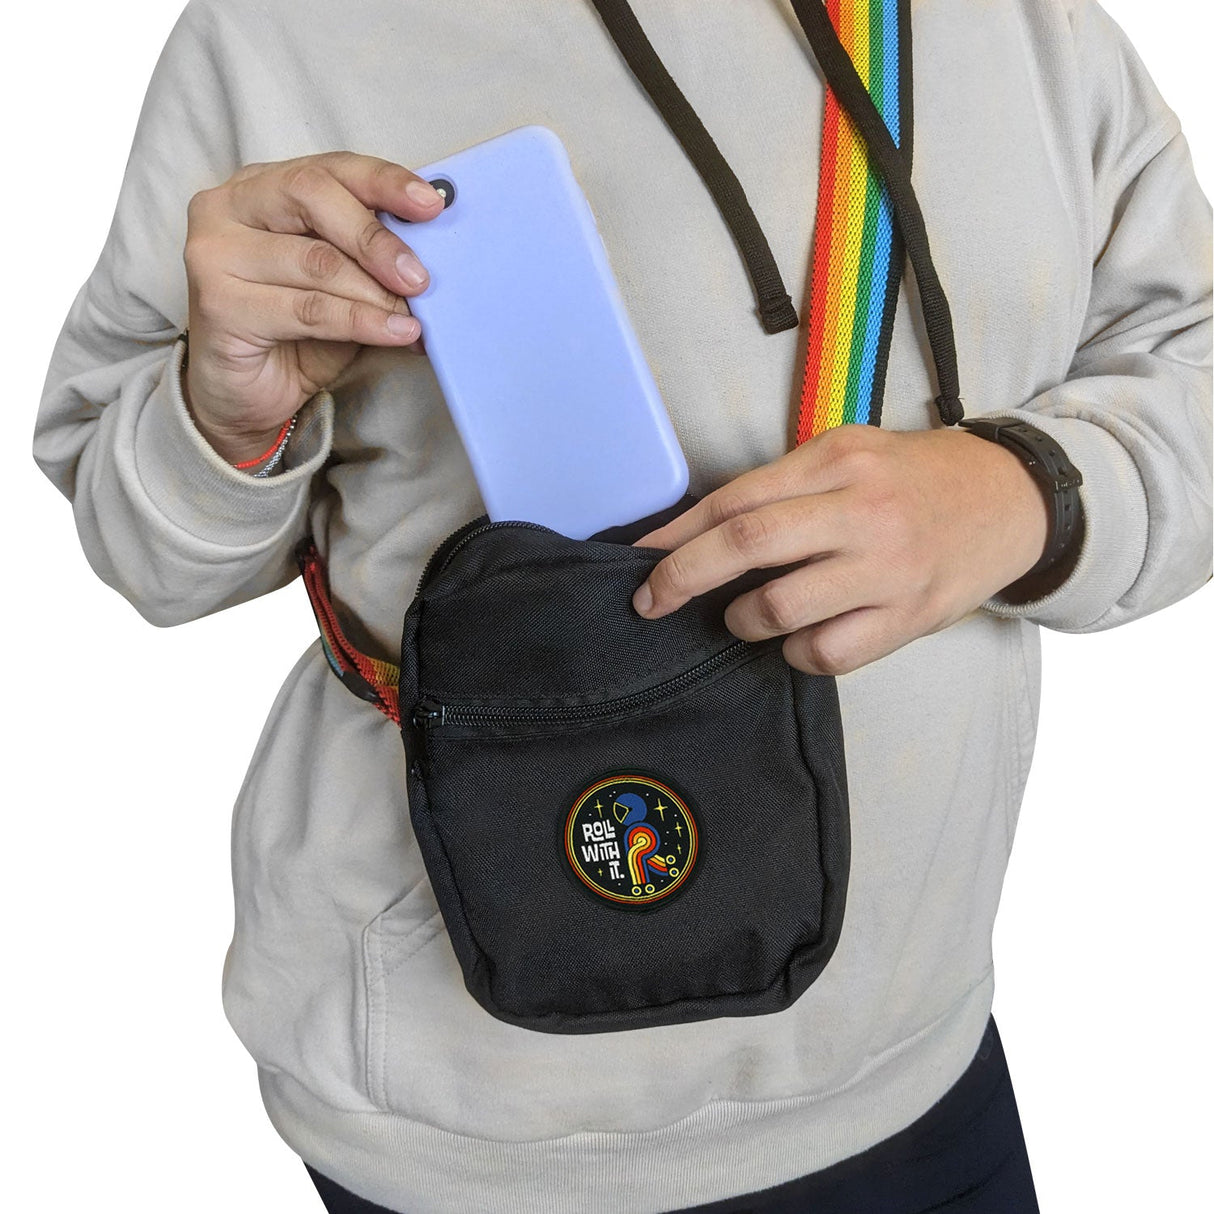 Roll With It Rollerskating Rainbow Strap Shoulder Bag